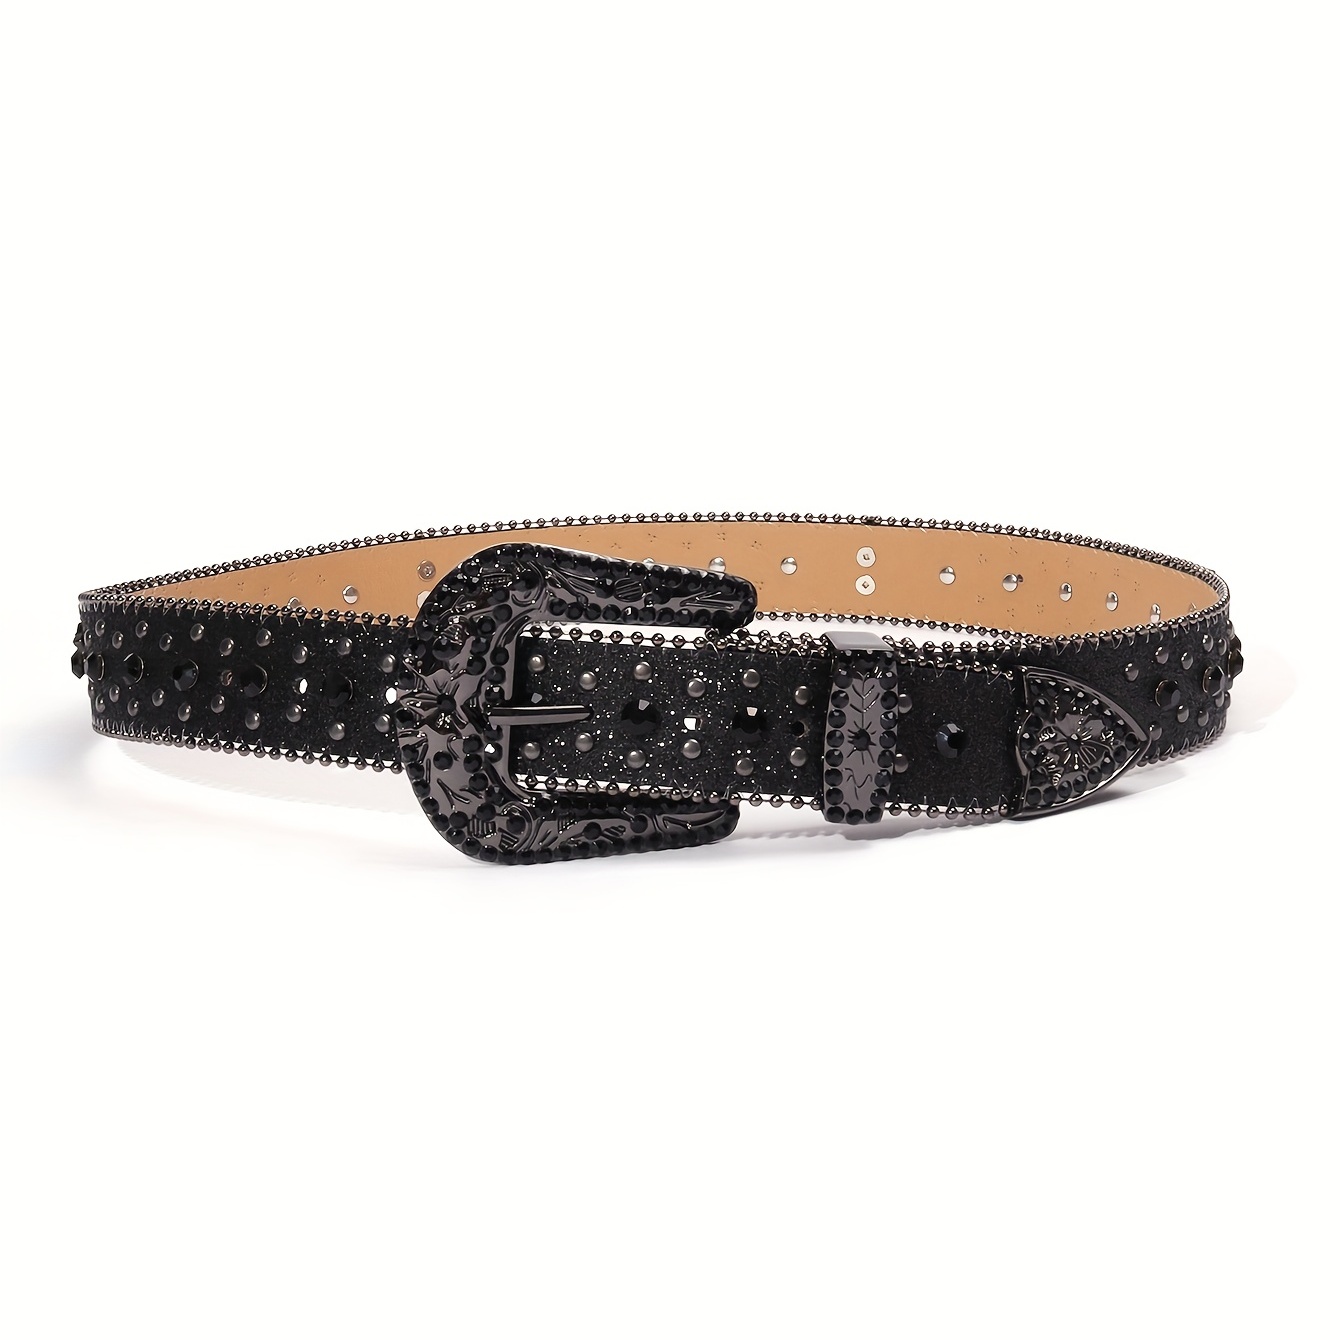 Shiny Diamond Designer Belts For Men And Women - Multicolored With Bling  Rhinestones - Perfect Gift